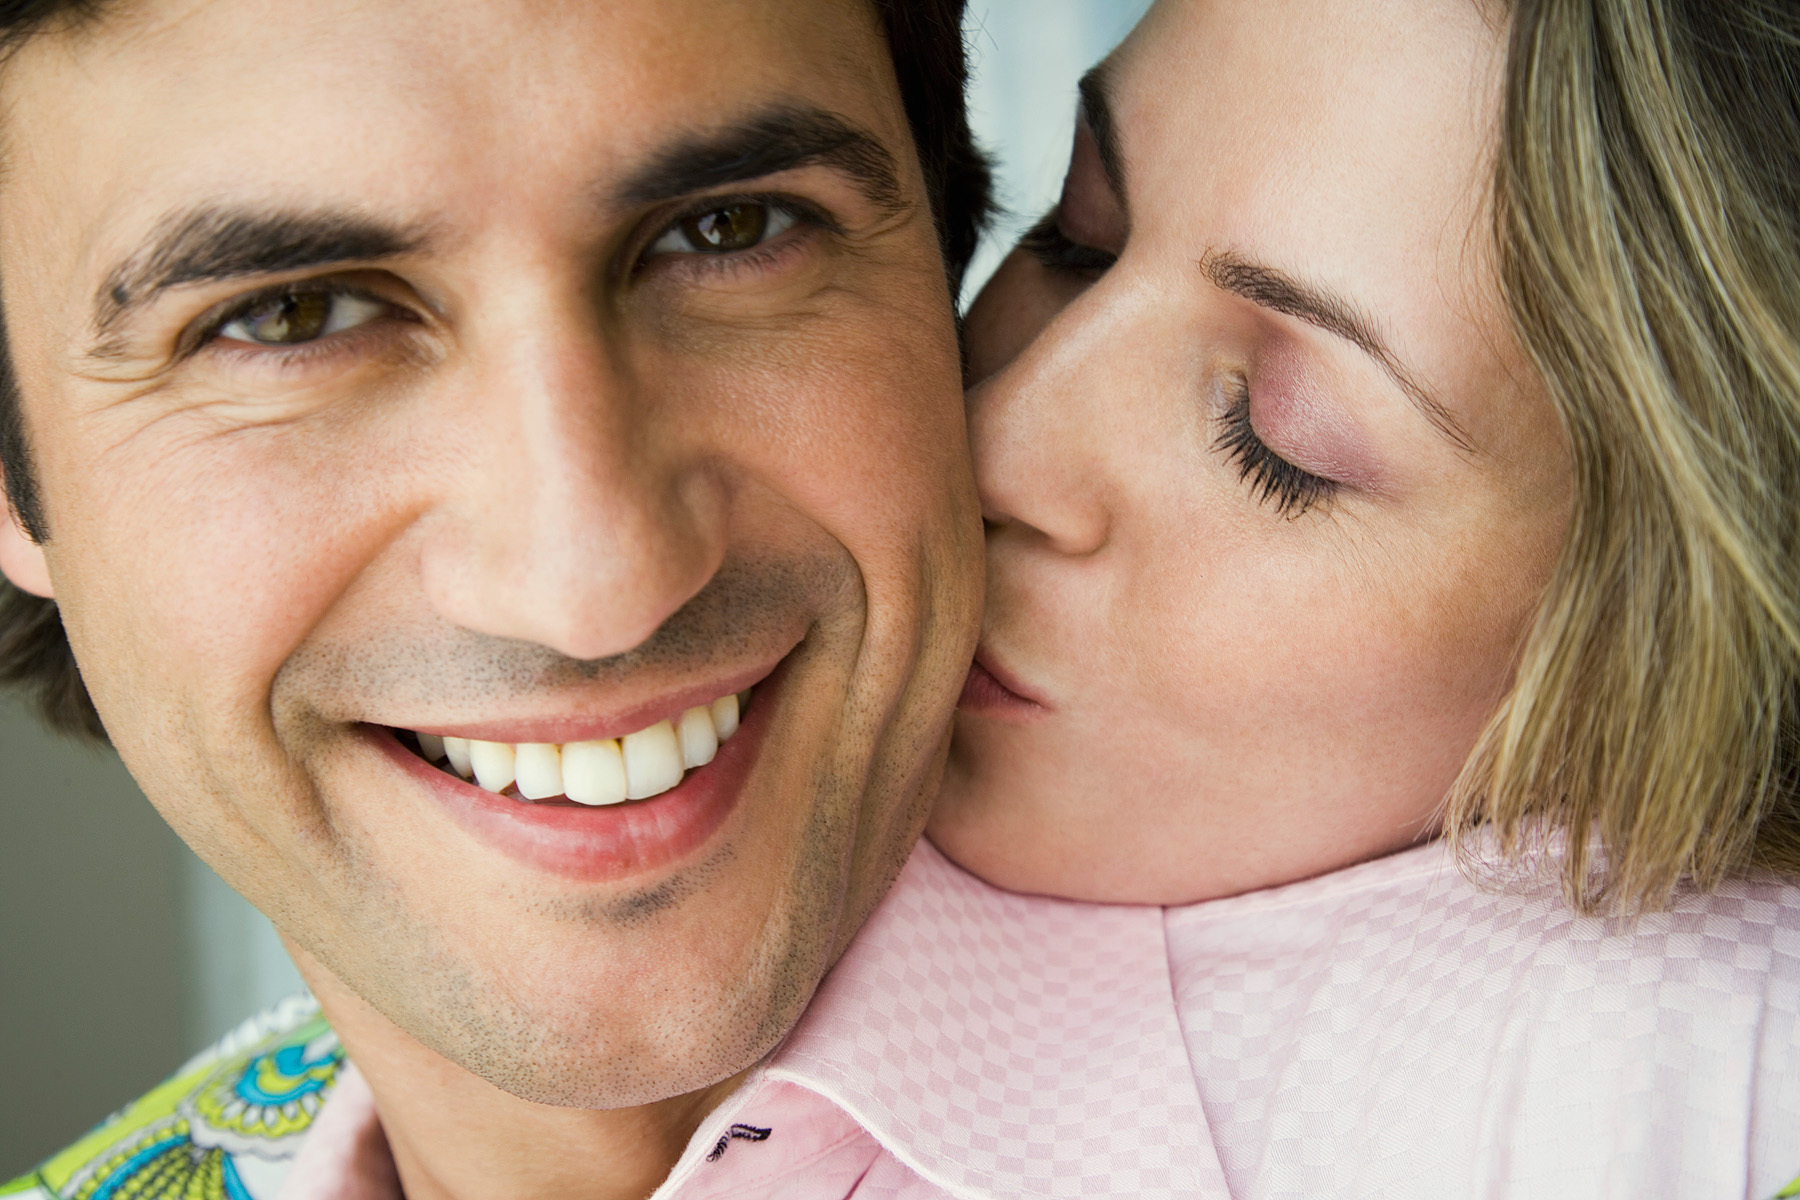 This is the BLUEPRINT for relationship happiness in 2015